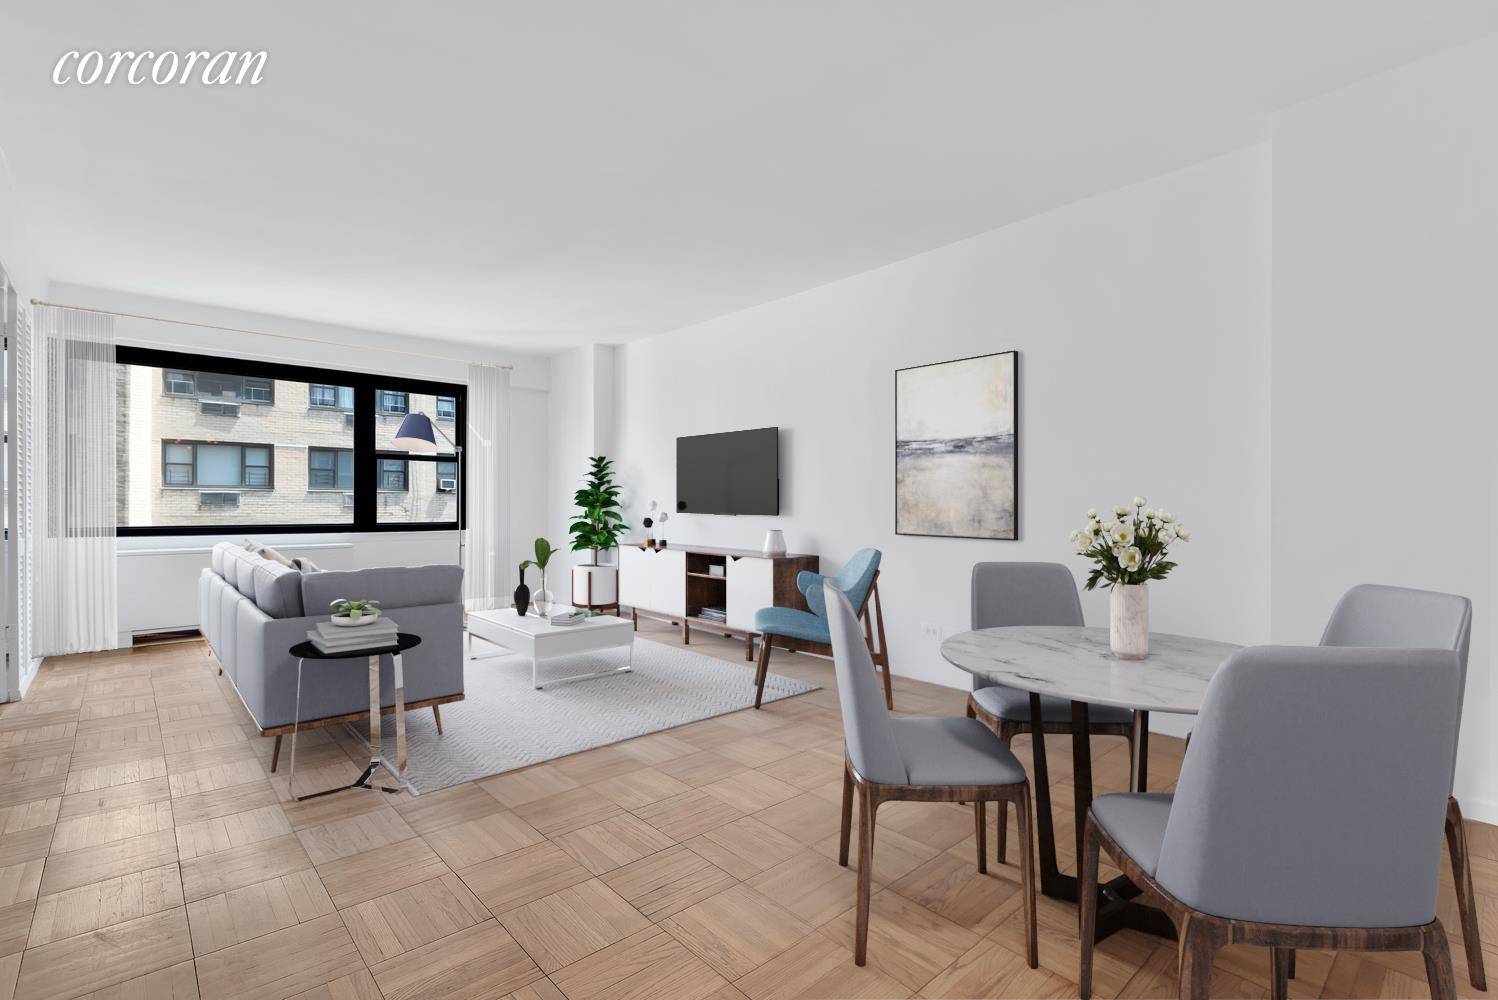 Welcome to this lovely north facing one bedroom apartment on the 8th floor of 333 East 66th Street with great light and a spacious layout.